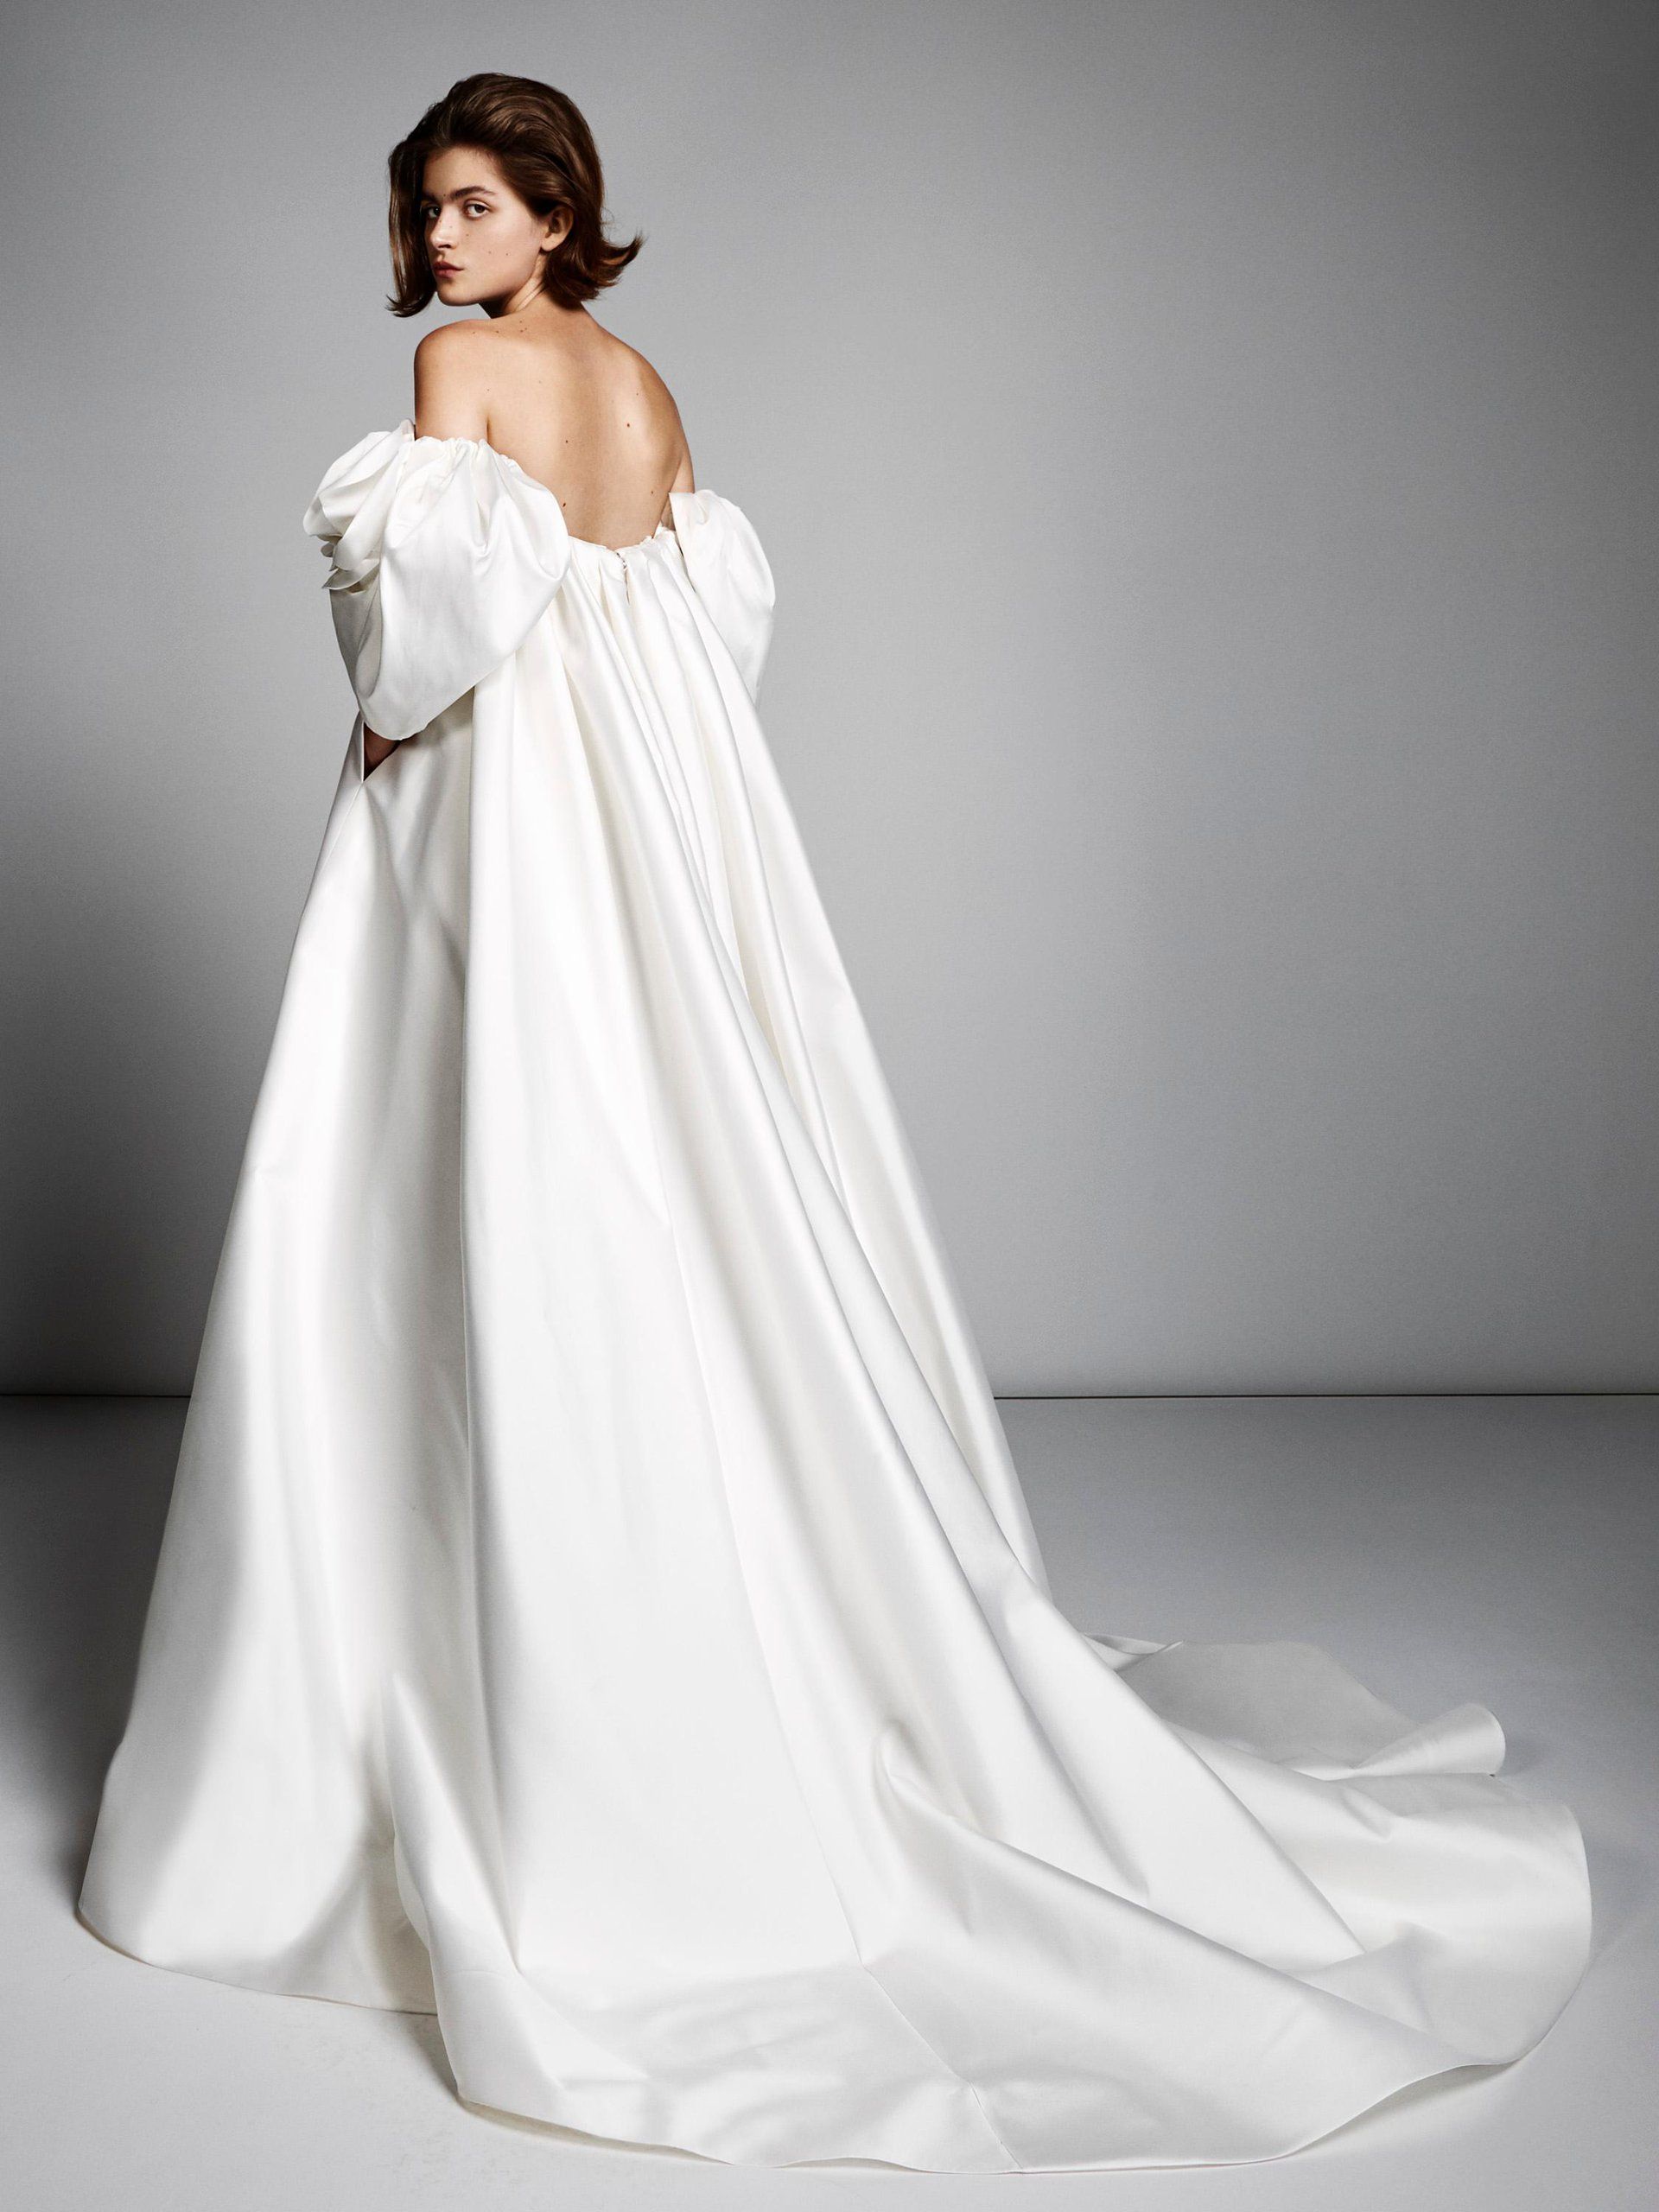 Image for post: Viktor & Rolfe Mariage Trunk Show - Kelly's Closet - Feb 2020